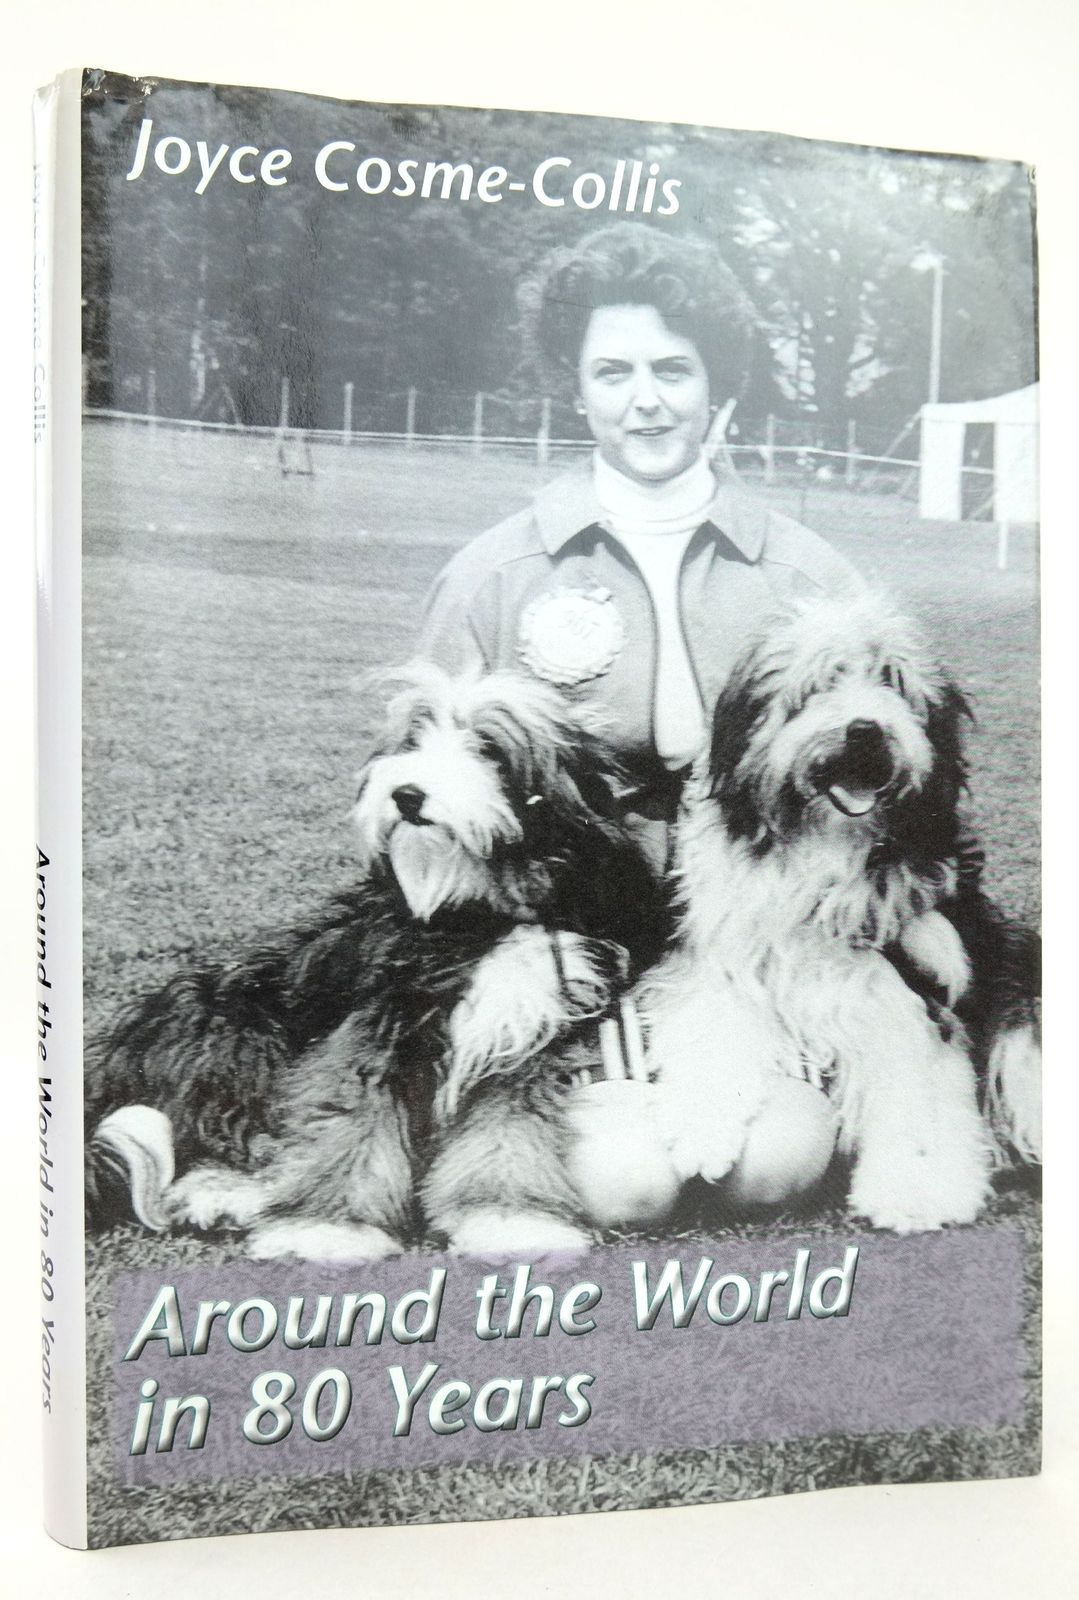 Photo of AROUND THE WORLD IN 80 YEARS written by Cosme-Collis, Joyce published by Felix Cosme (STOCK CODE: 1819153)  for sale by Stella & Rose's Books